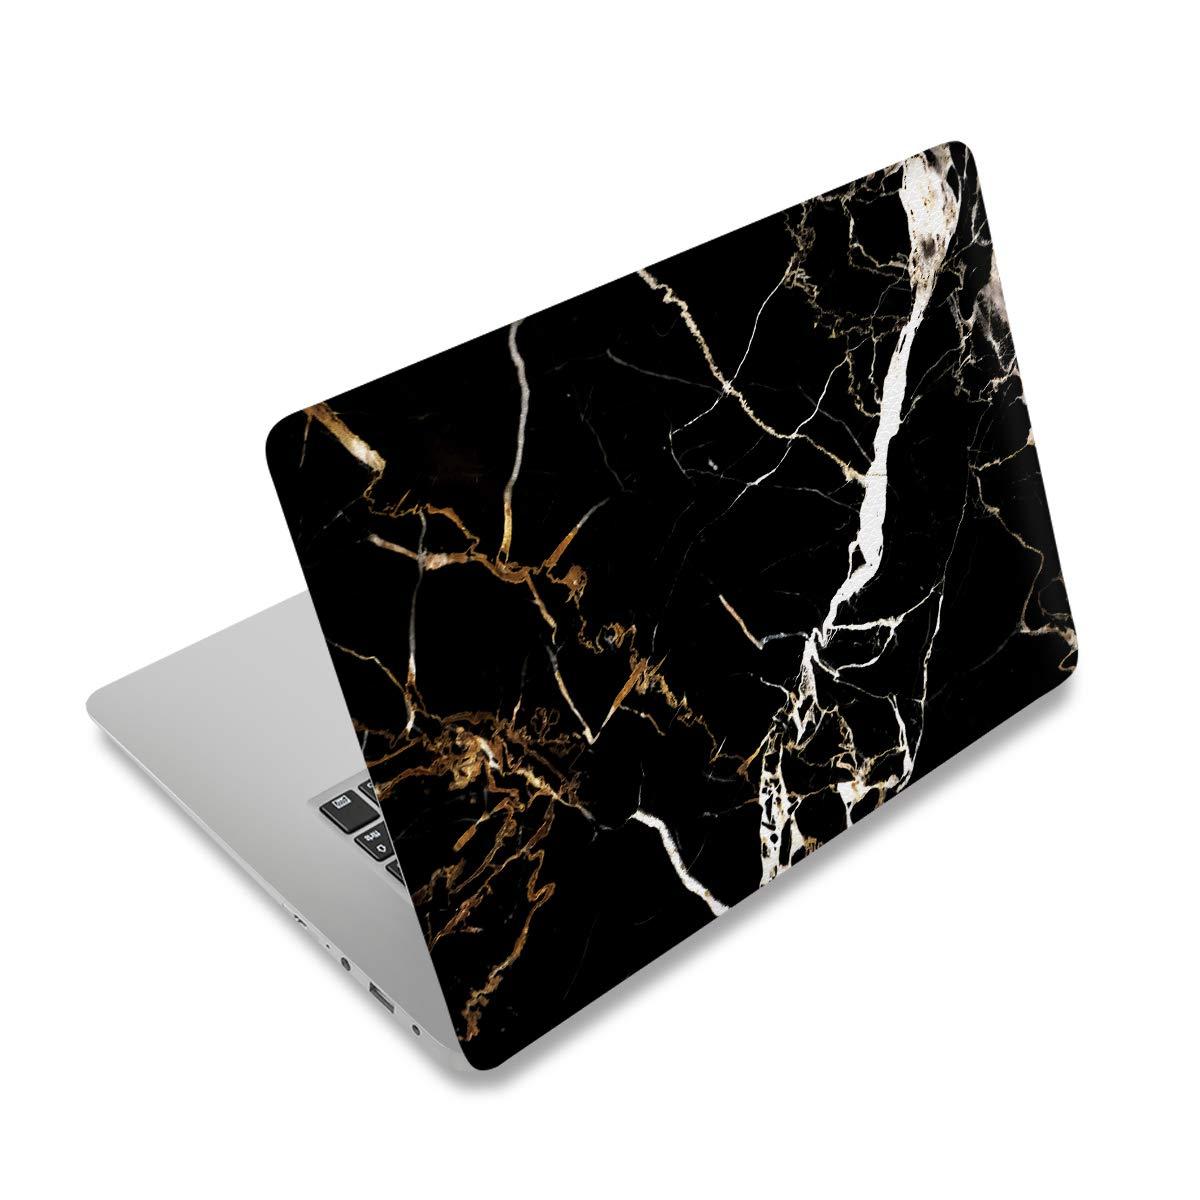 Laptop Skin Sticker Decal,12 13 13.3 14 15 15.4 15.6 Laptop Skin  Sticker Protector Cover for Toshiba Hp Samsung Dell Apple Acer Leonovo Sony  Asus Laptop Notebook (Marble)